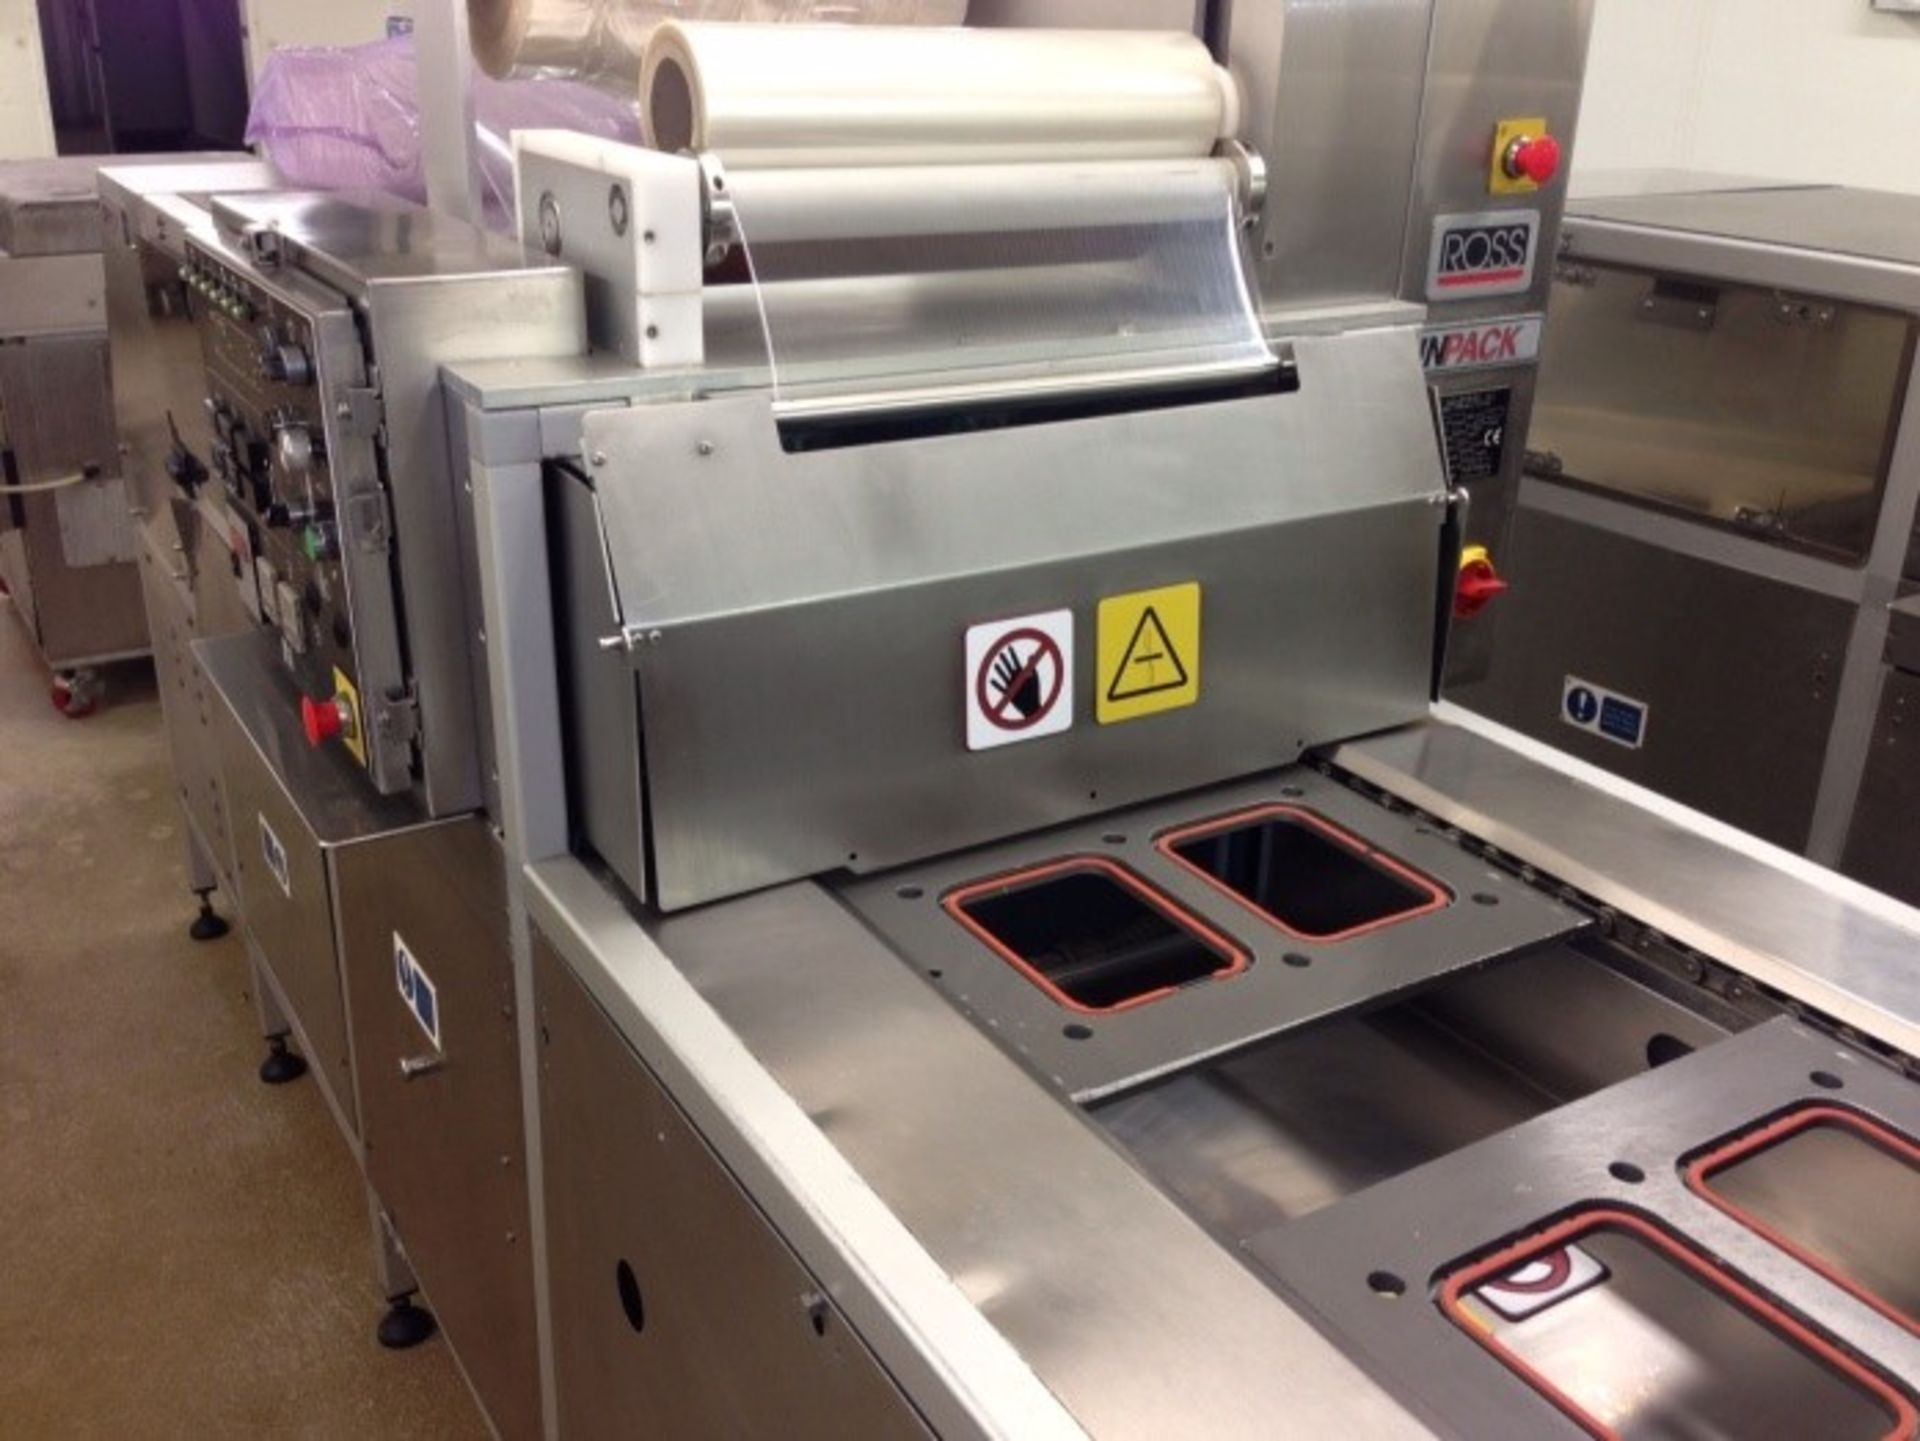 Ross Inpack Junior A20 Automatic Tray Sealer The Inpack Junior A20 is an automatic tray sealer